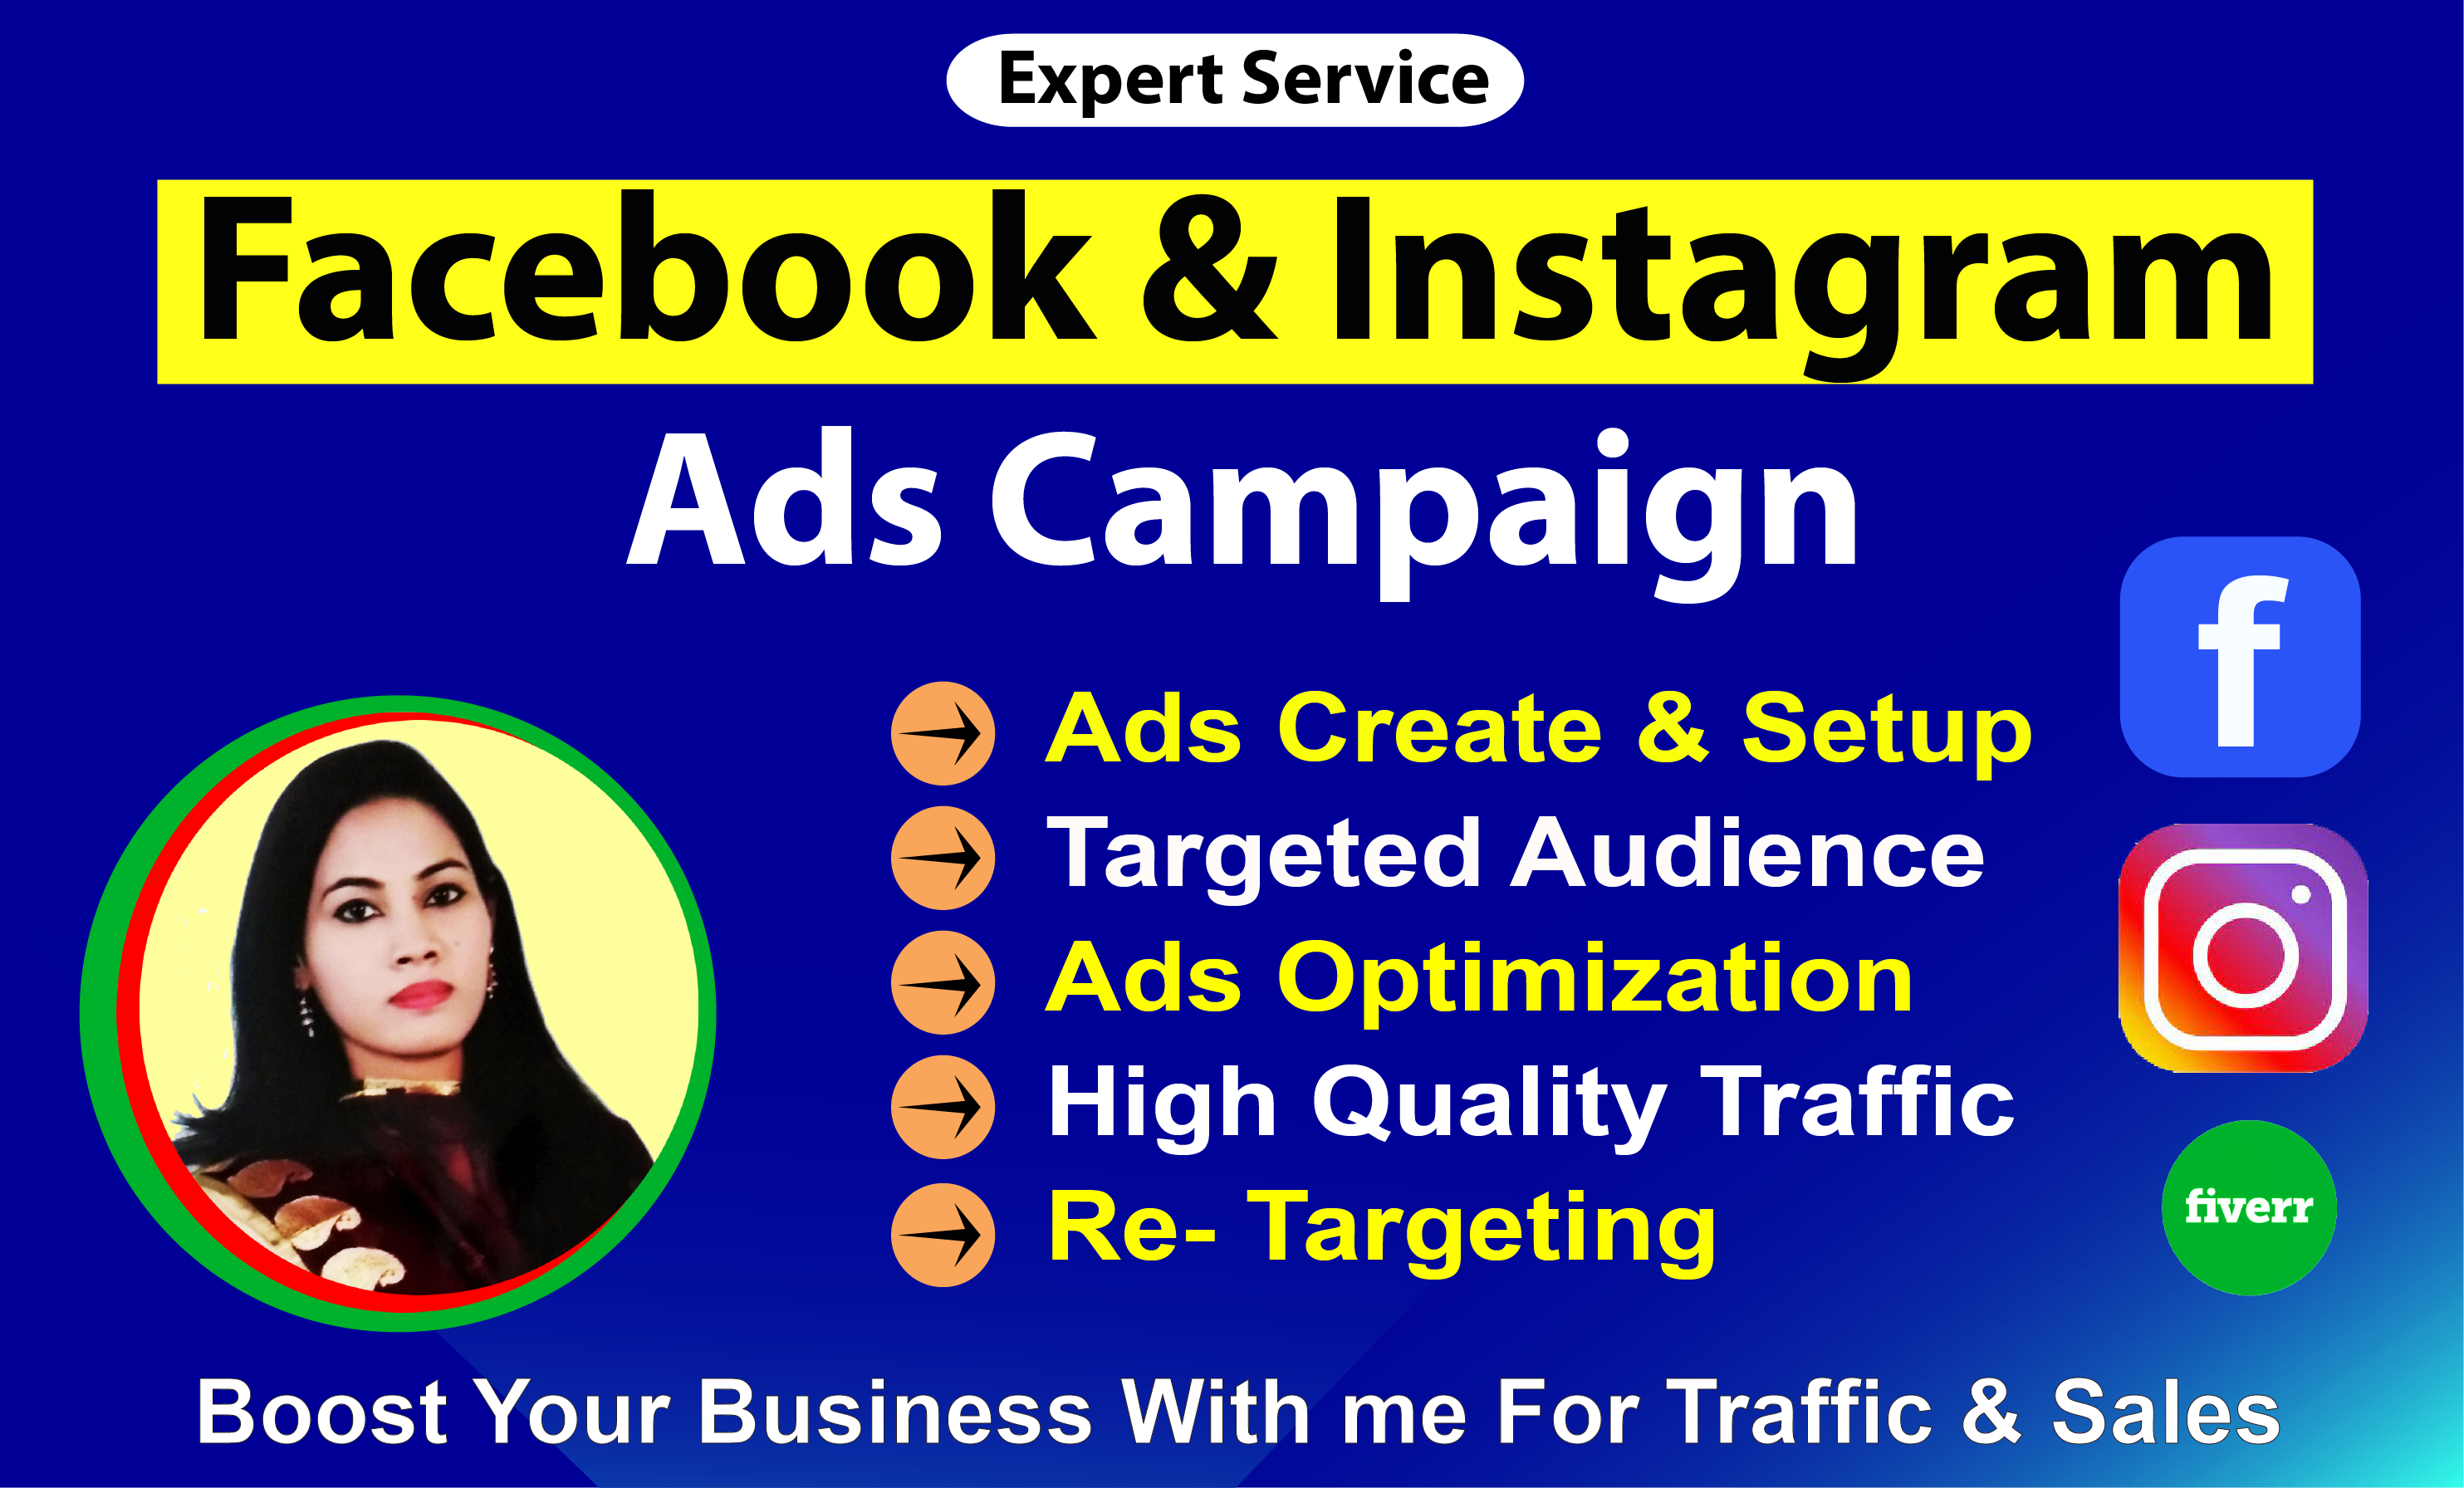 I will be your facebook ads campaign manager, fb advertising, instagram ads, FiverrBox